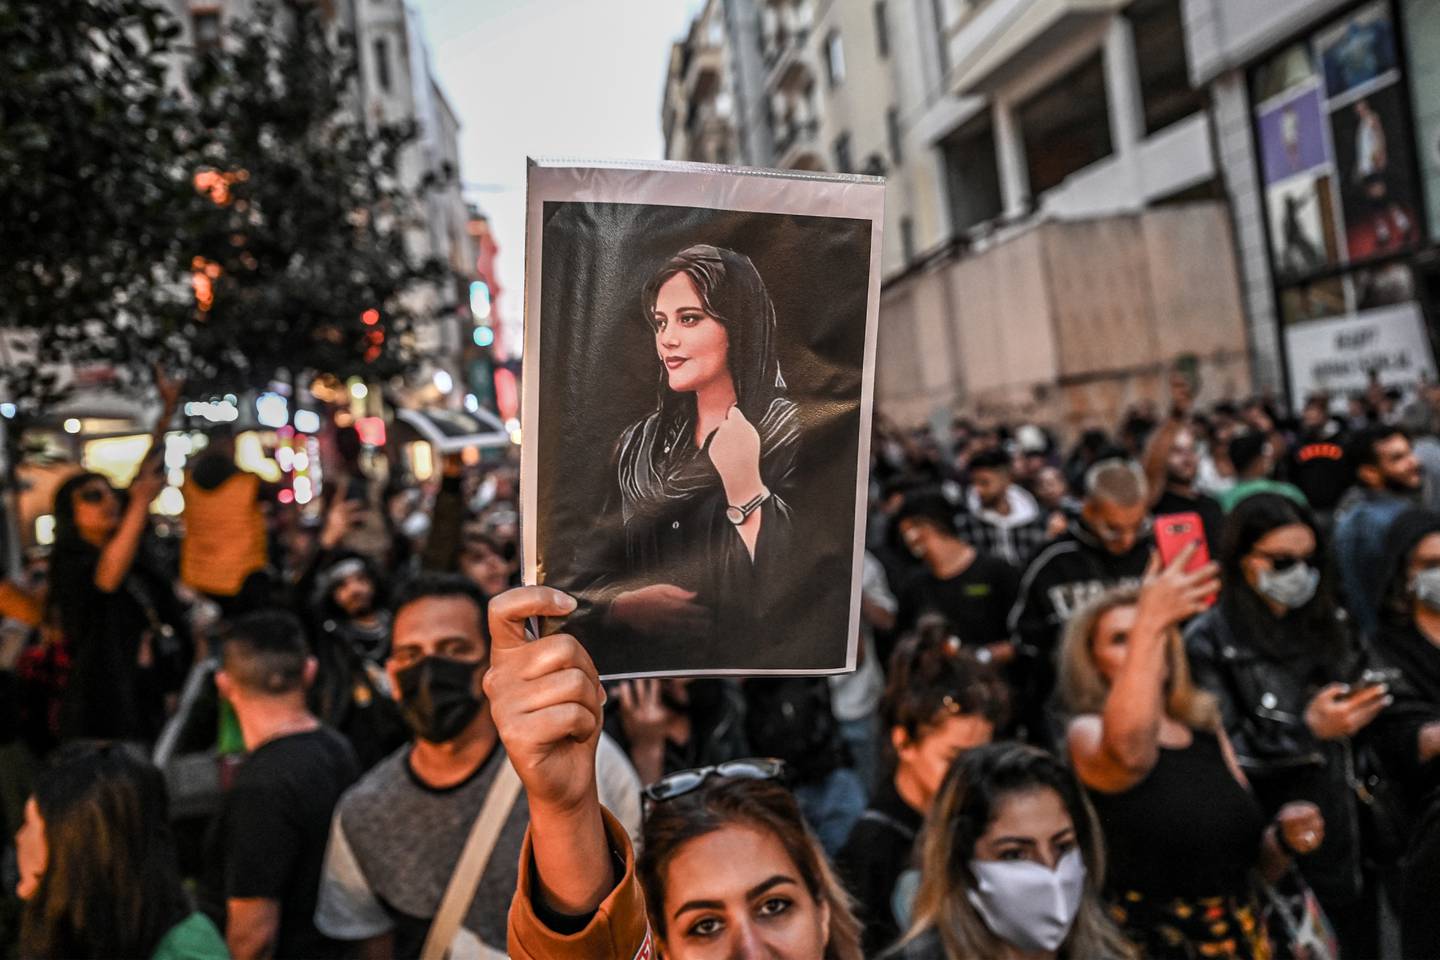 A protester holds a portrait of Mahsa Amini during a demonstration in support of Amini, a young Iranian woman who died after being arrested in Tehran by the Islamic Republic's morality police, on Istiklal avenue in Istanbul on September 20. AFP